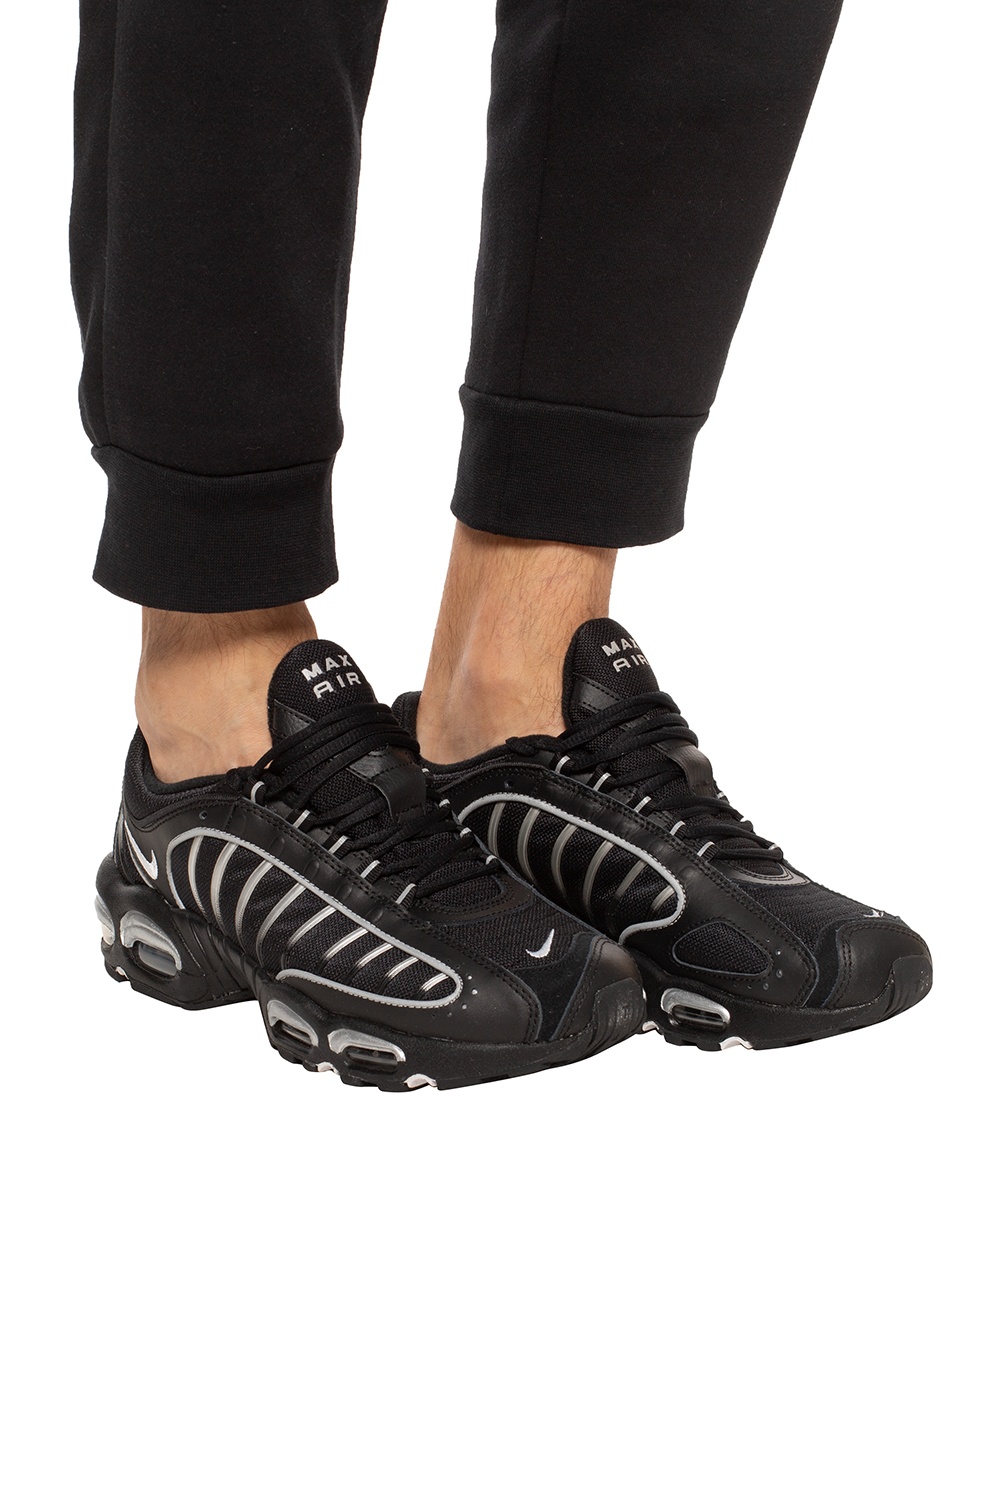 nike air max tailwind 4 black and white